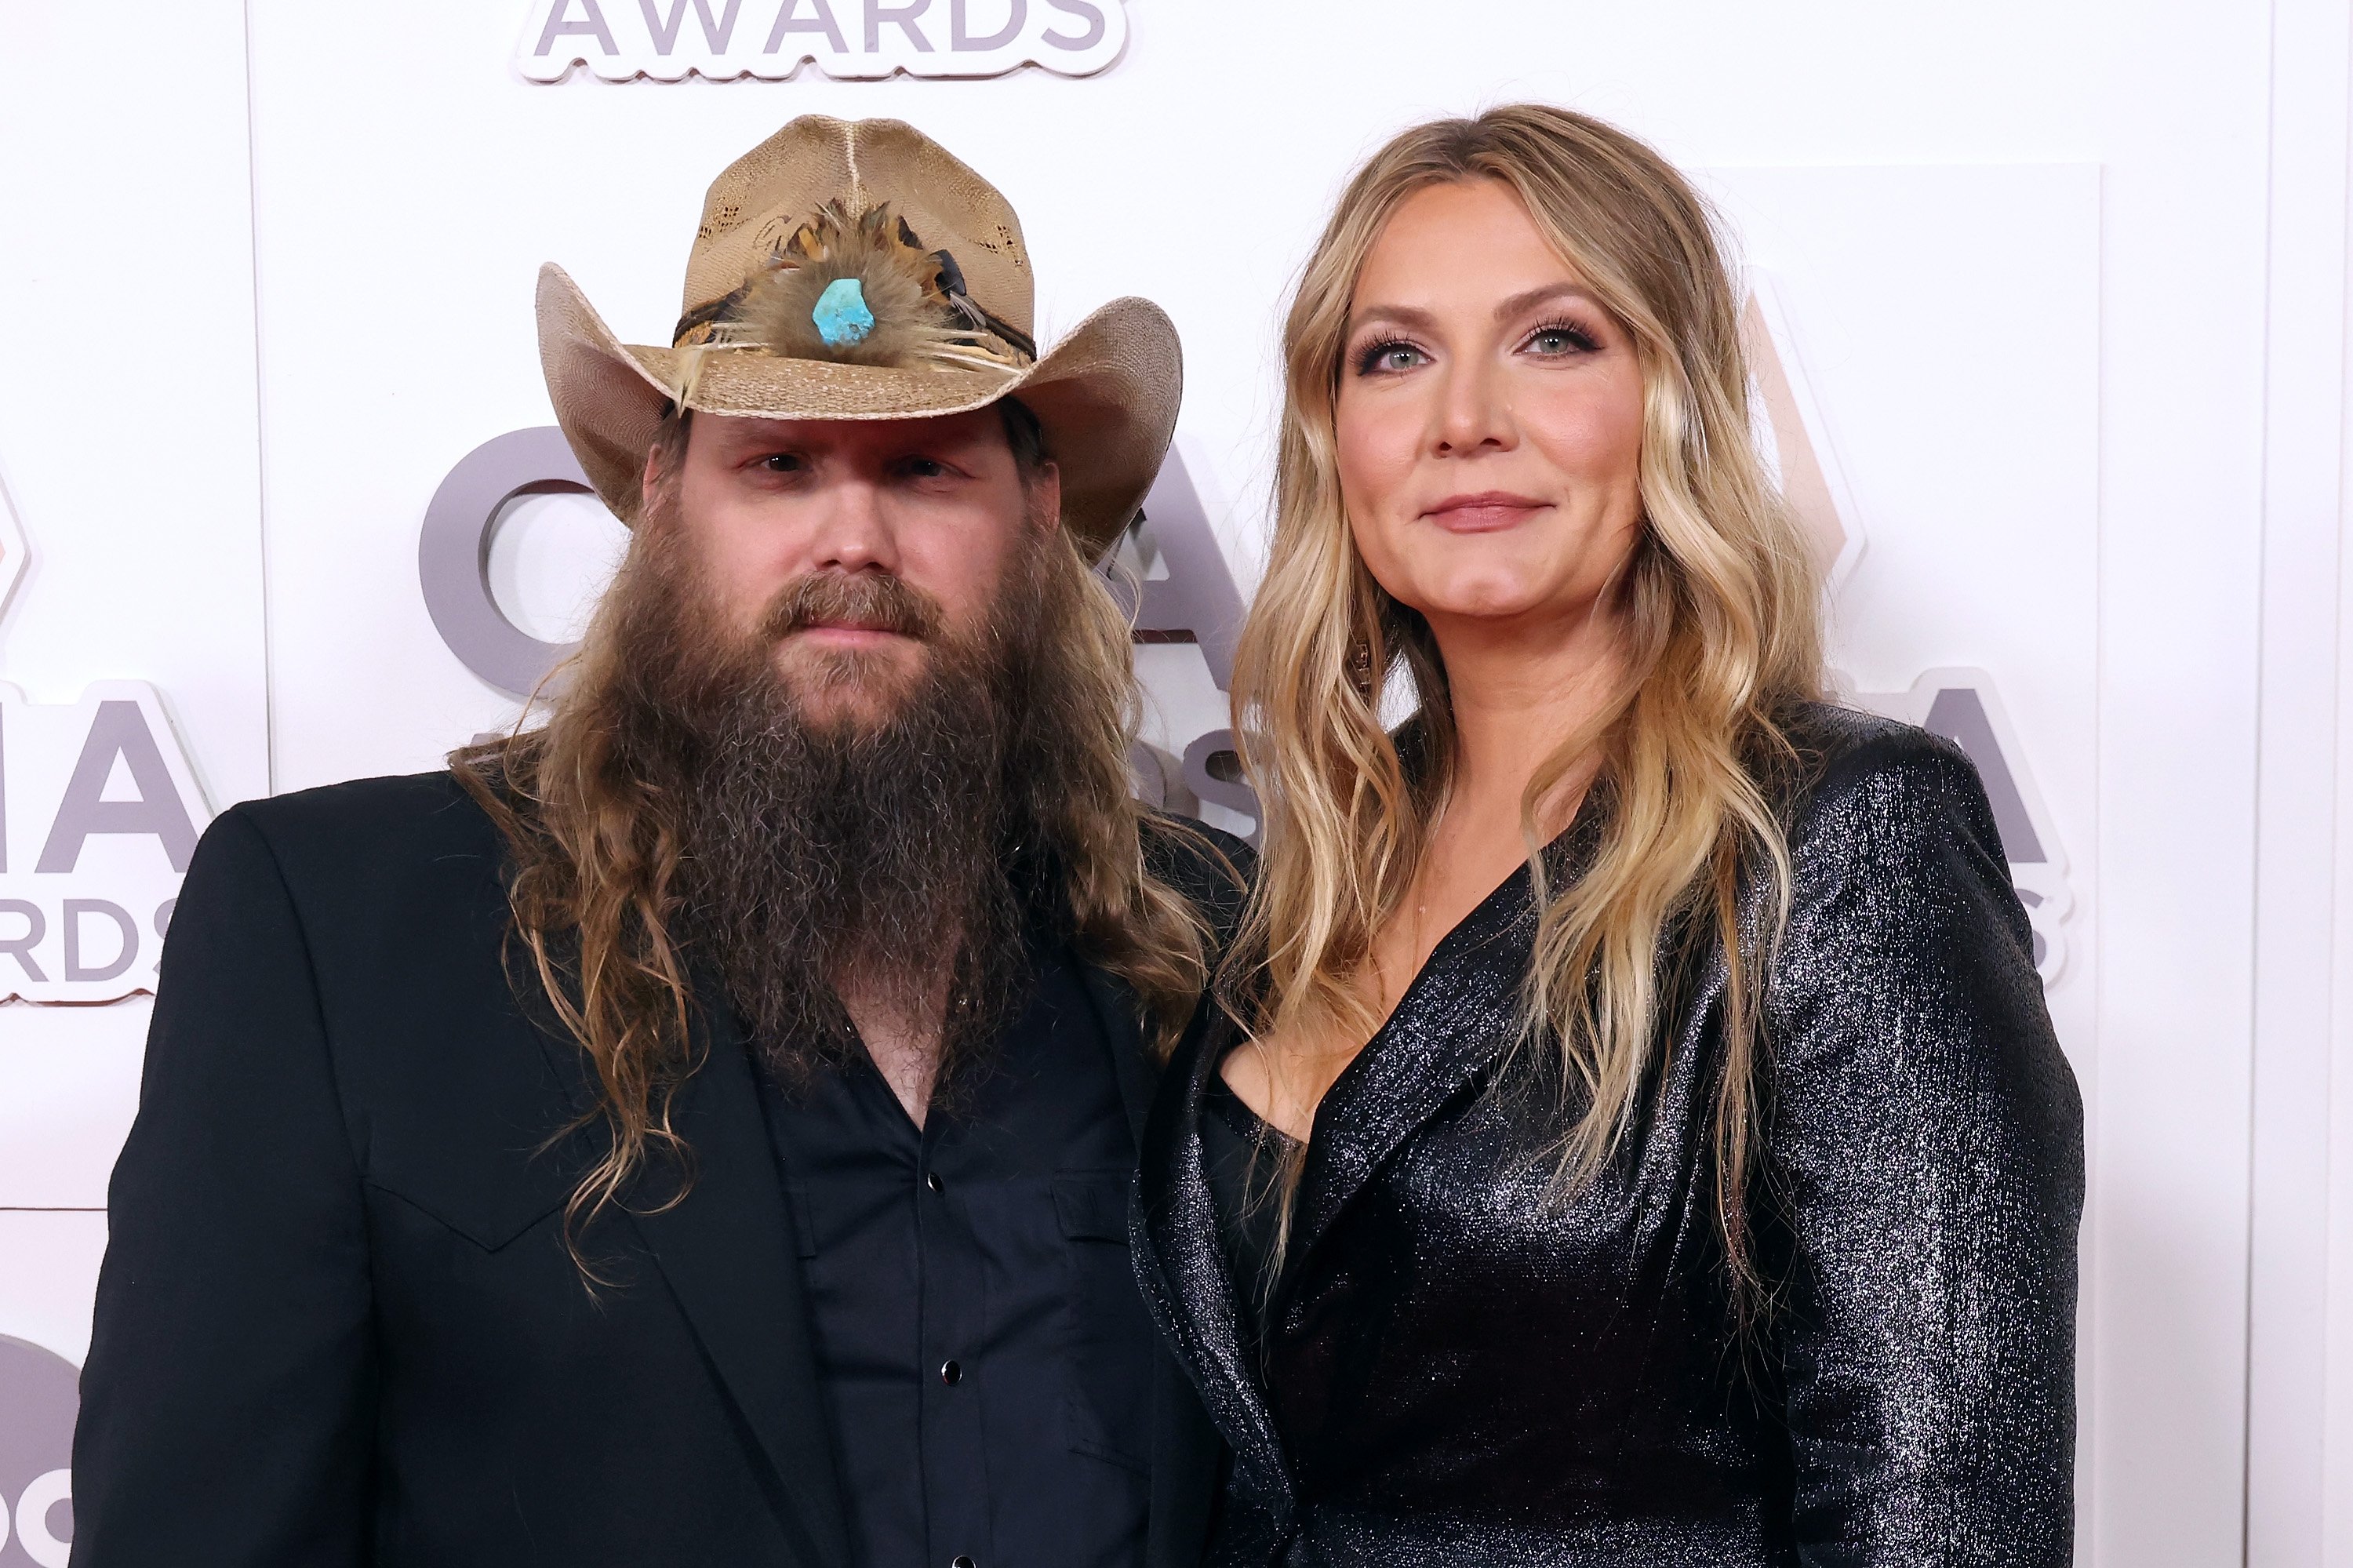 Chris Stapleton and Morgane Stapleton are pictured at the 56th Annual CMA Awards at Bridgestone Arena on November 9, 2022, in Nashville, Tennessee | Source: Gett Images